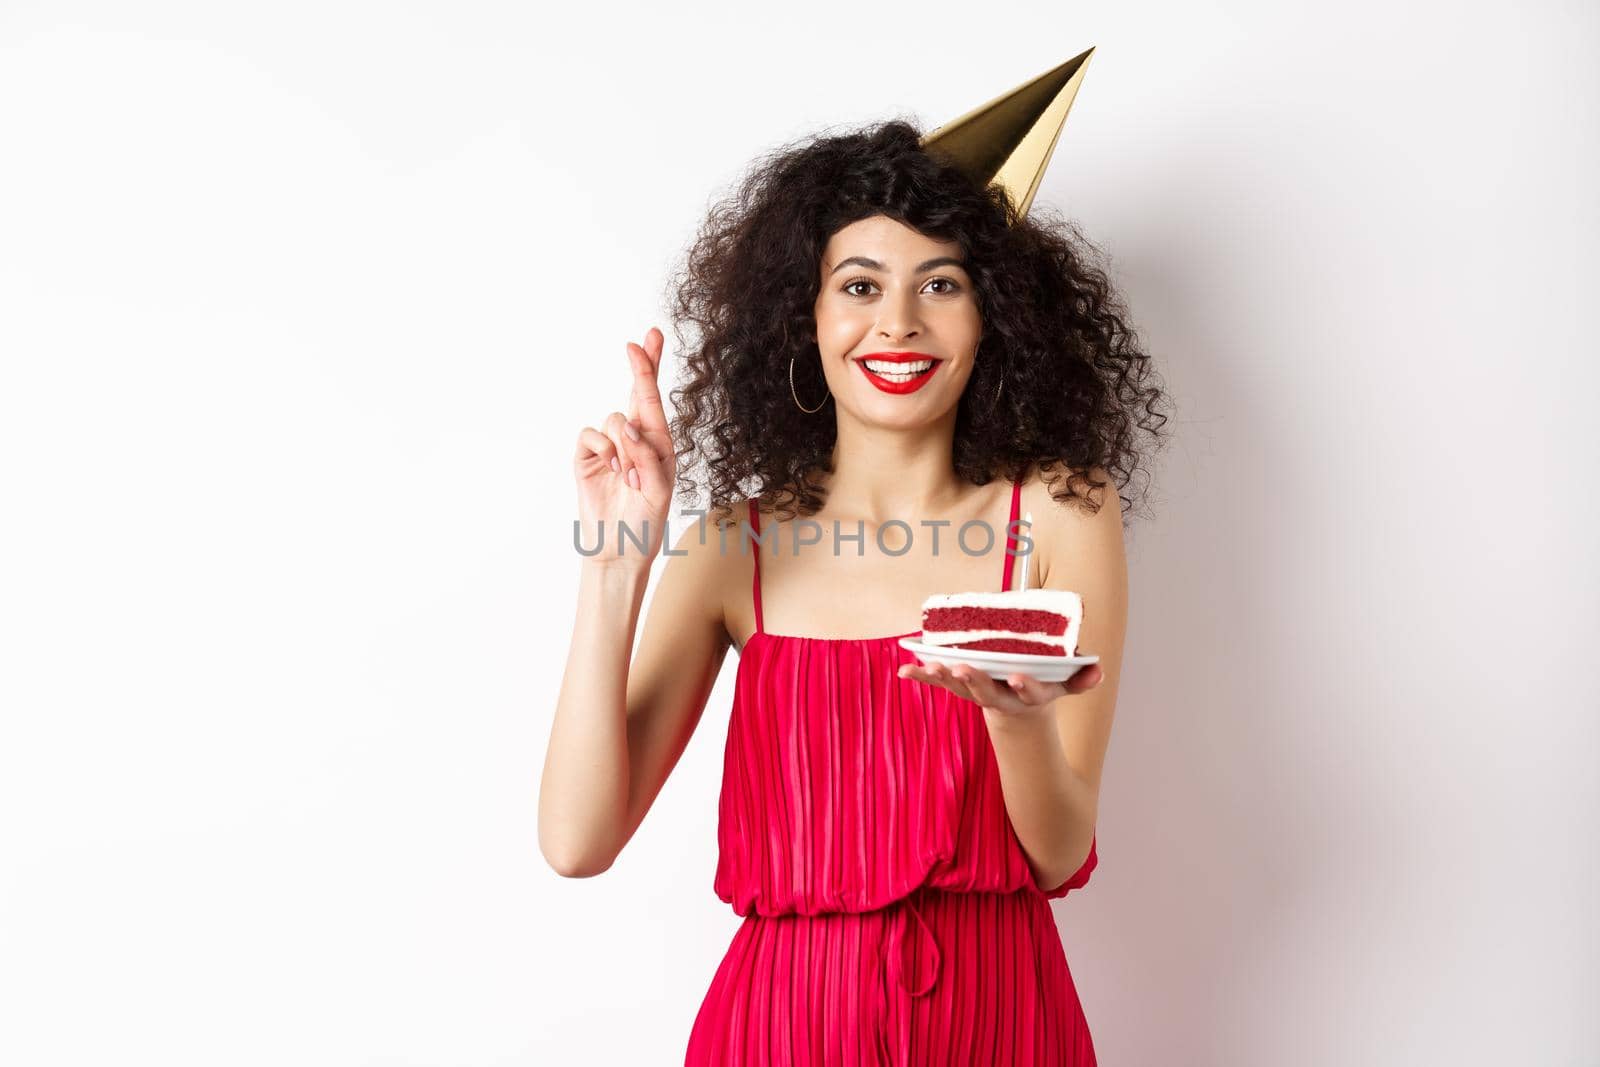 Excited birthday girl celebrating, making wish, holding cake and cross fingers good luck, standing happy on white background.